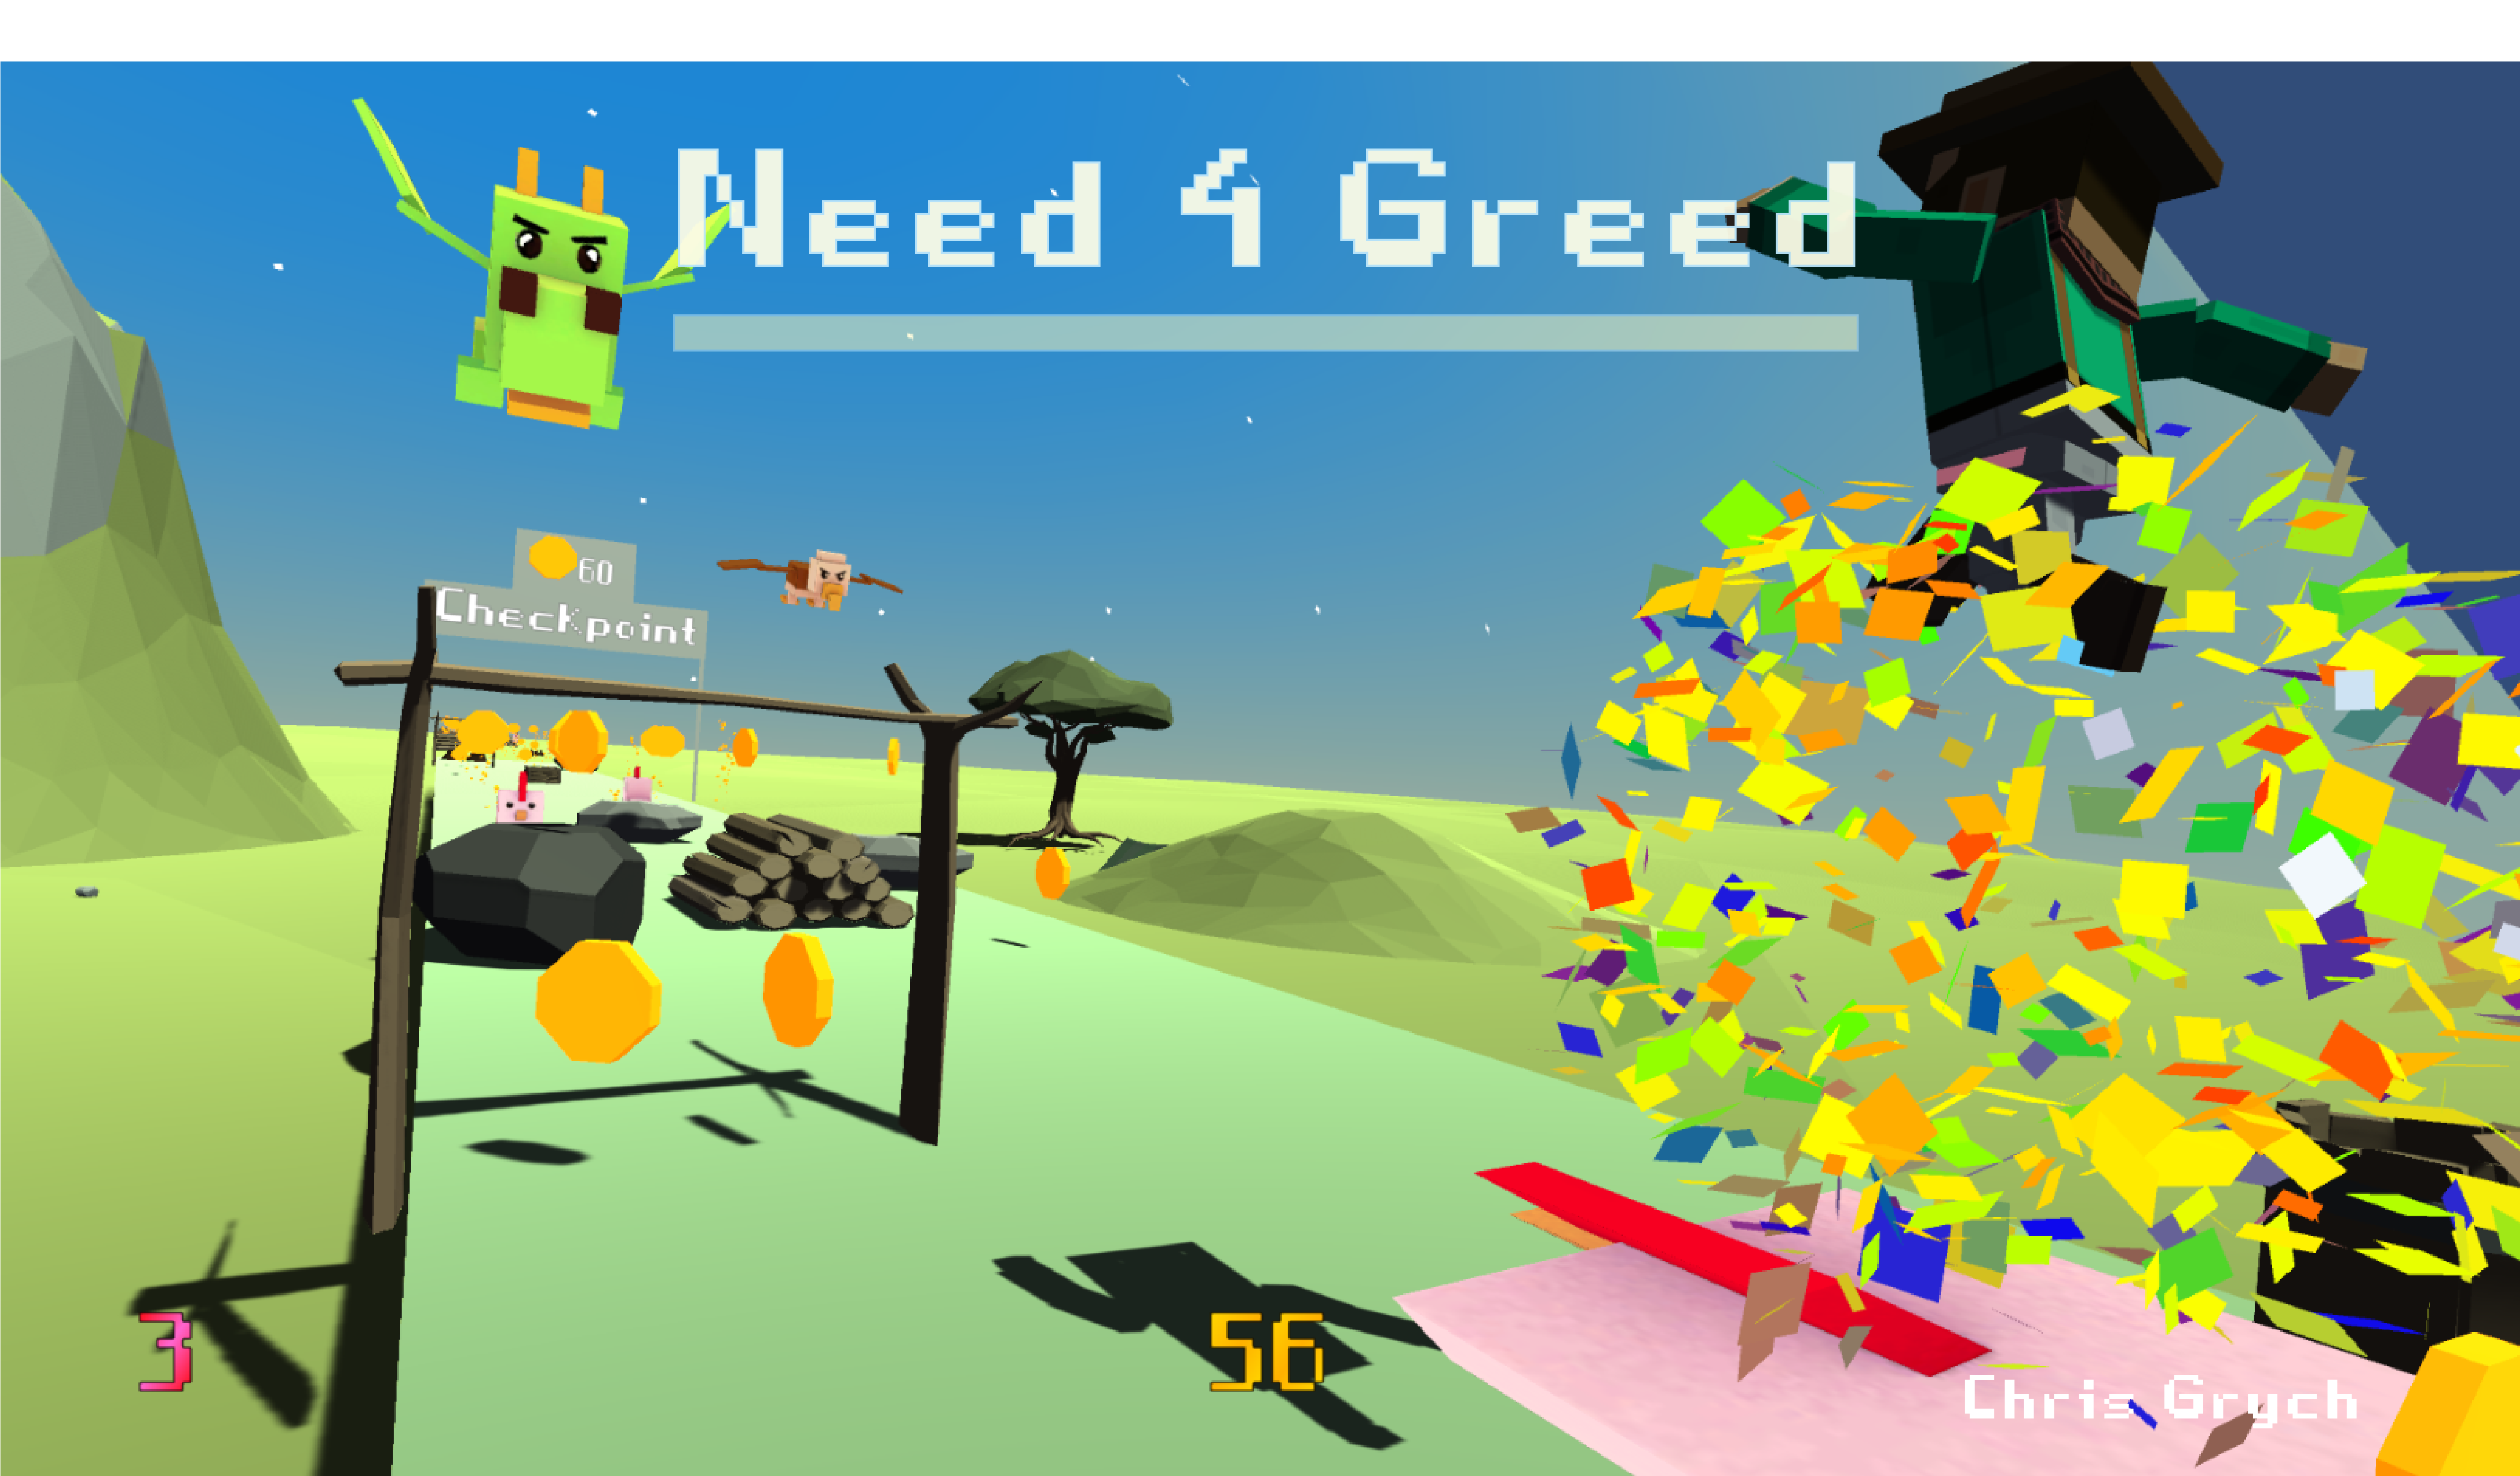 Need 4 Greed: A Finite Runner